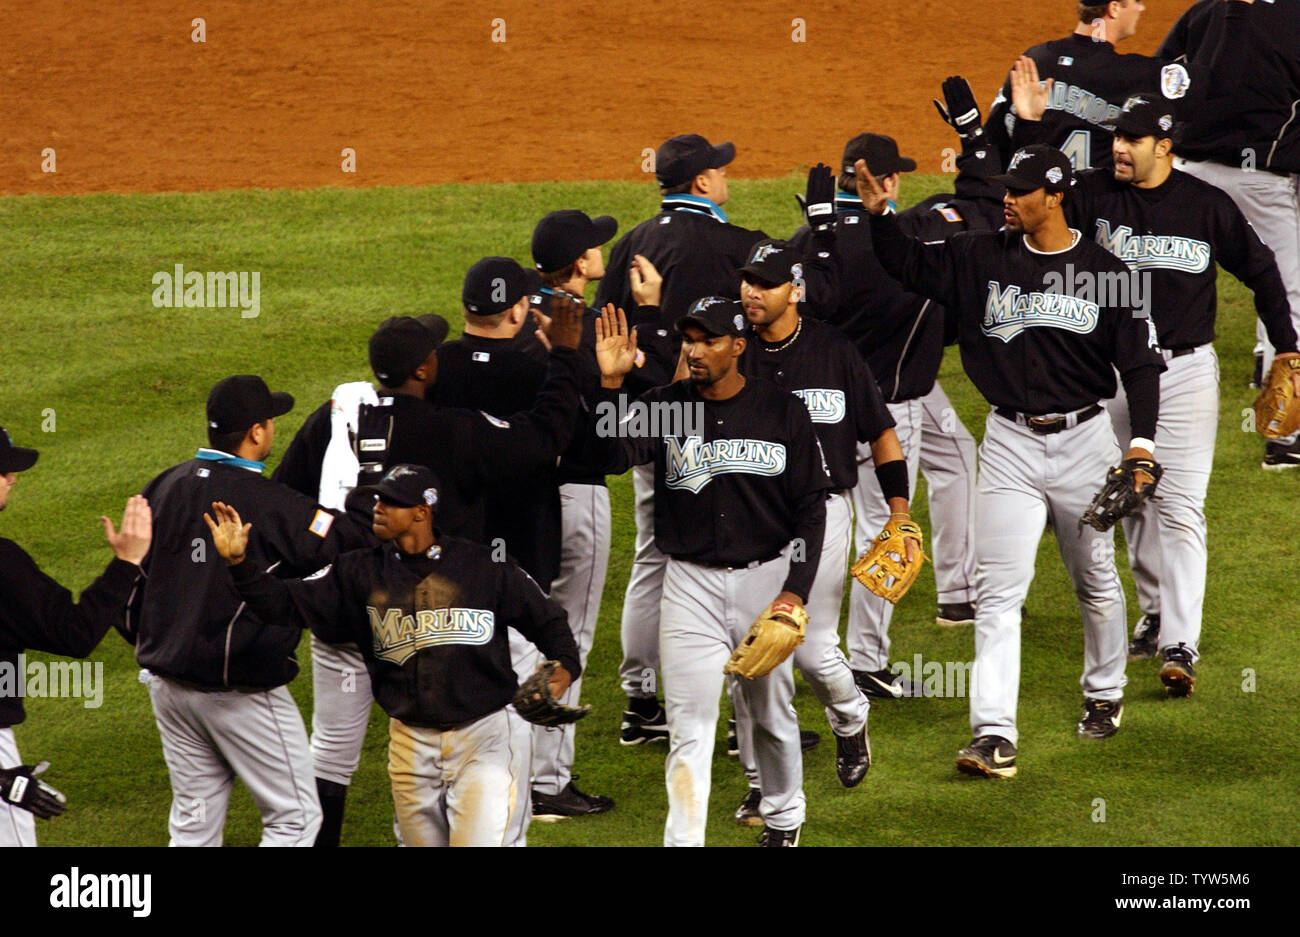 The Florida Marlins celebrate their 3-2 win over the New York Yankees in Game 1 of the World Series at Yankee Stadium on October 18, 2003.   (UPI/Roger L. Wollenberg) Stock Photo